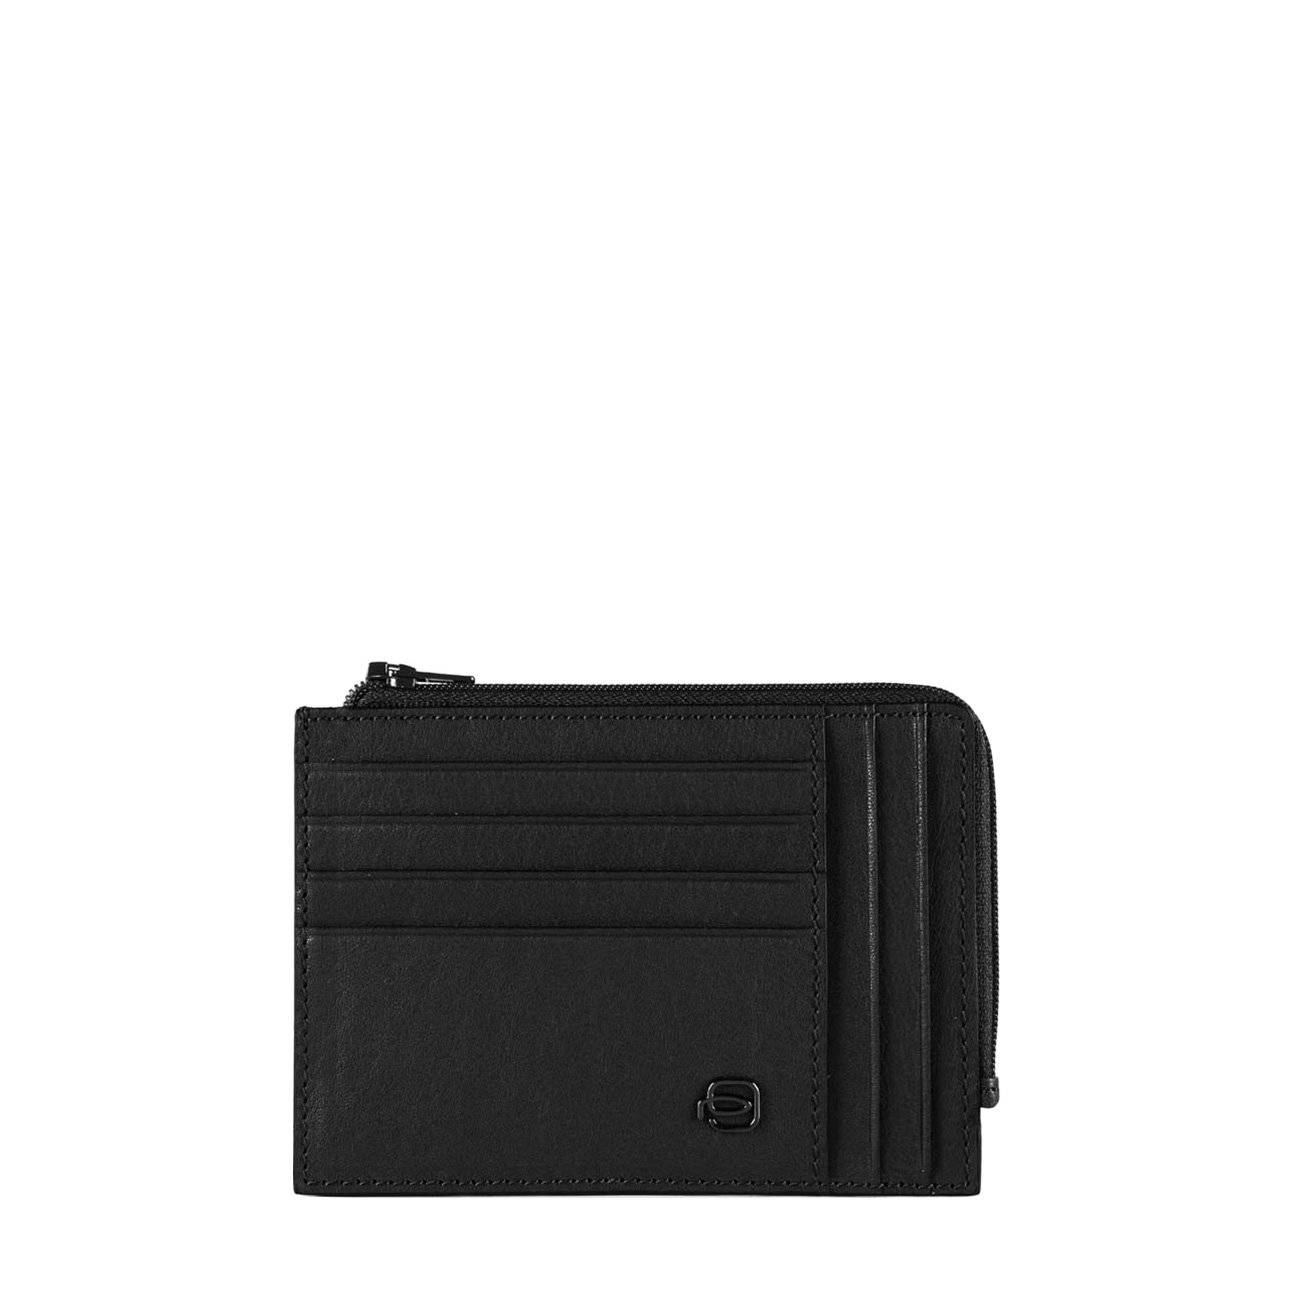 BLACK SQUARE COIN POUCH WITH DOCUMENT HOLDER